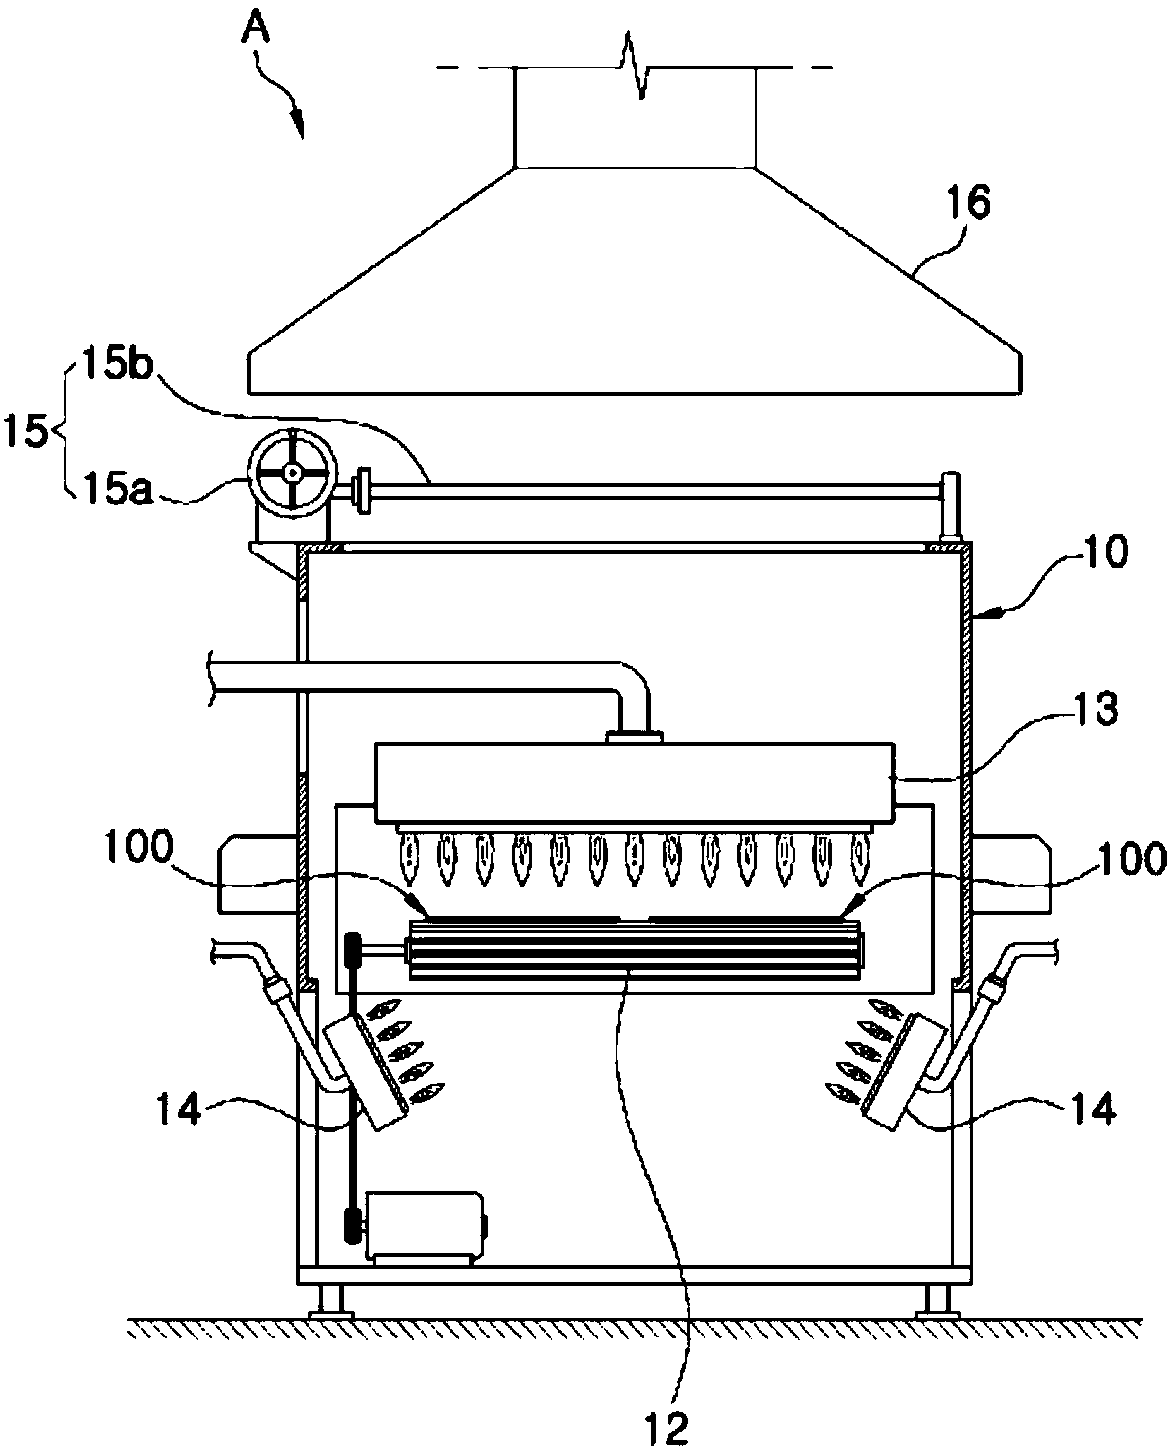 Apparatus for manufacturing grilled seaweed and method for manufacturing grilled seaweed